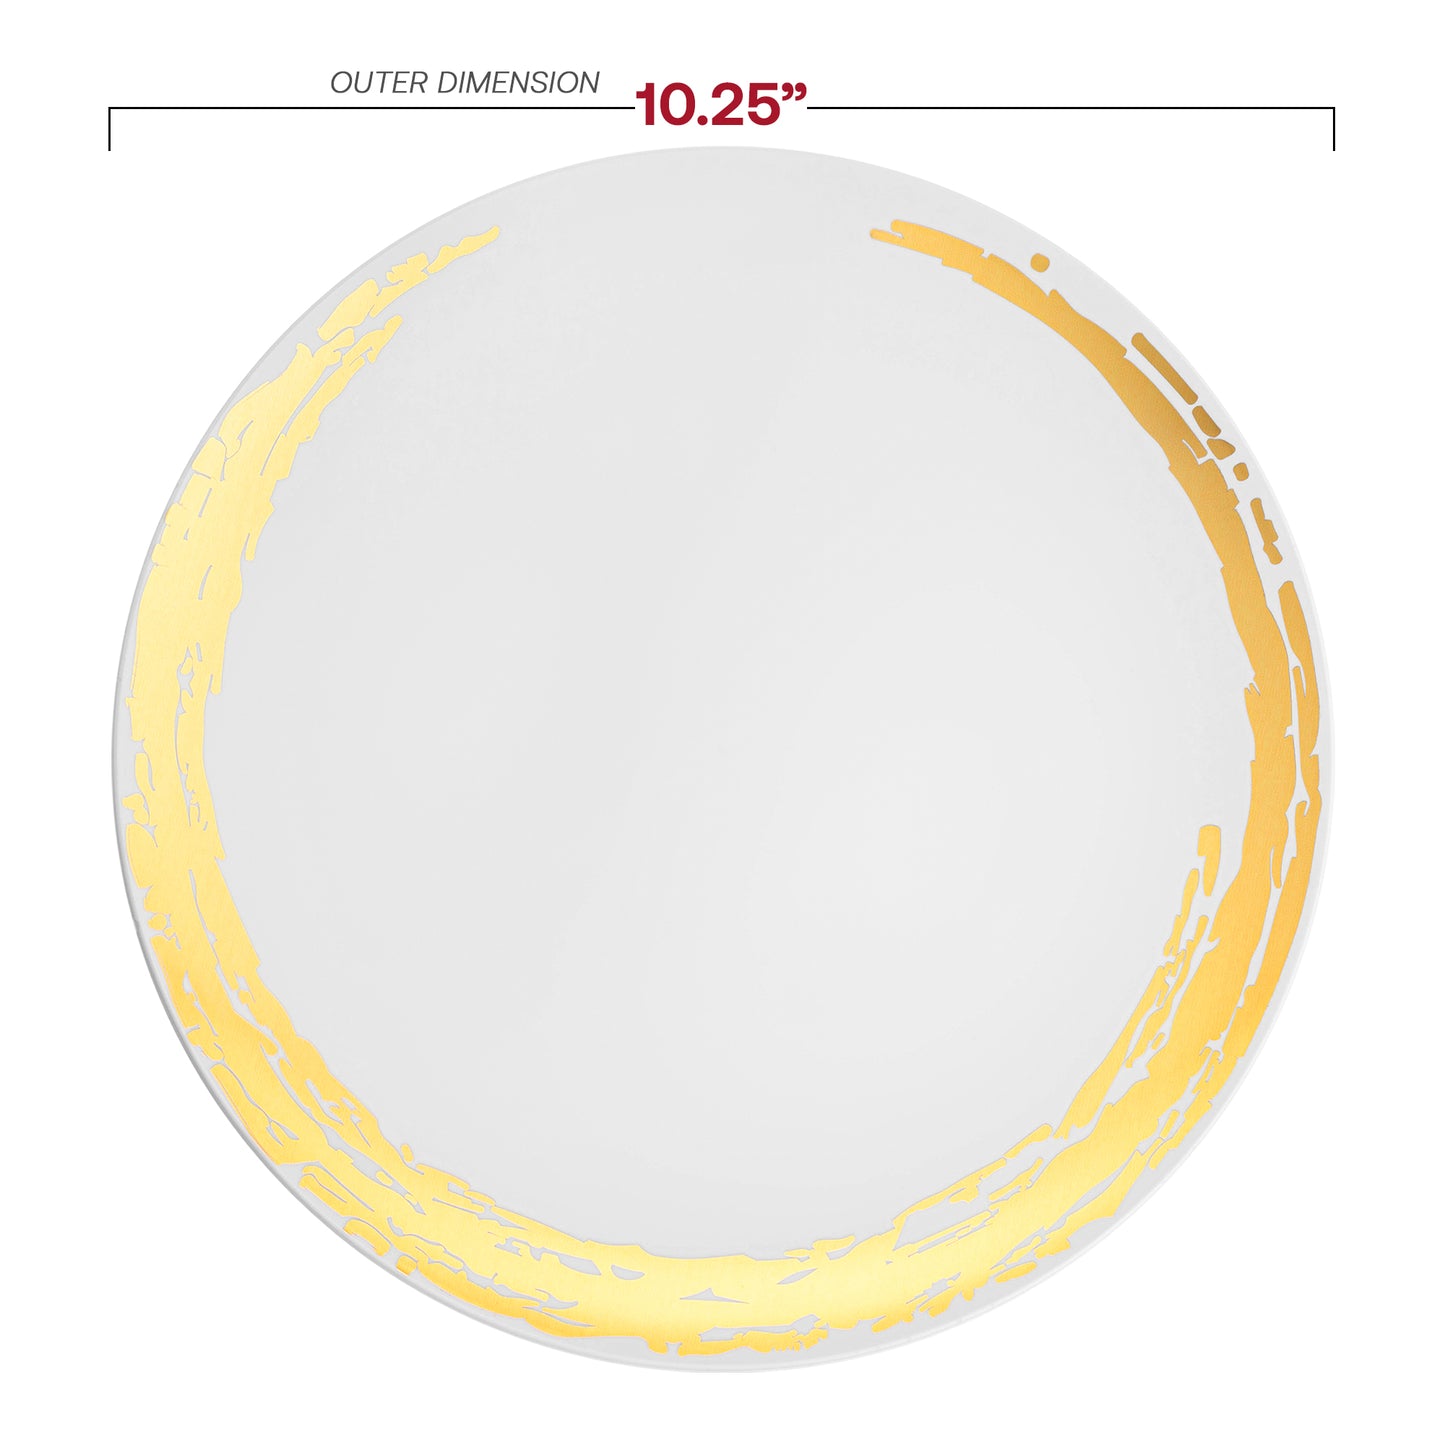 White with Gold Moonlight Round Disposable Plastic Dinner Plates (10.25") Dimension | The Kaya Collection